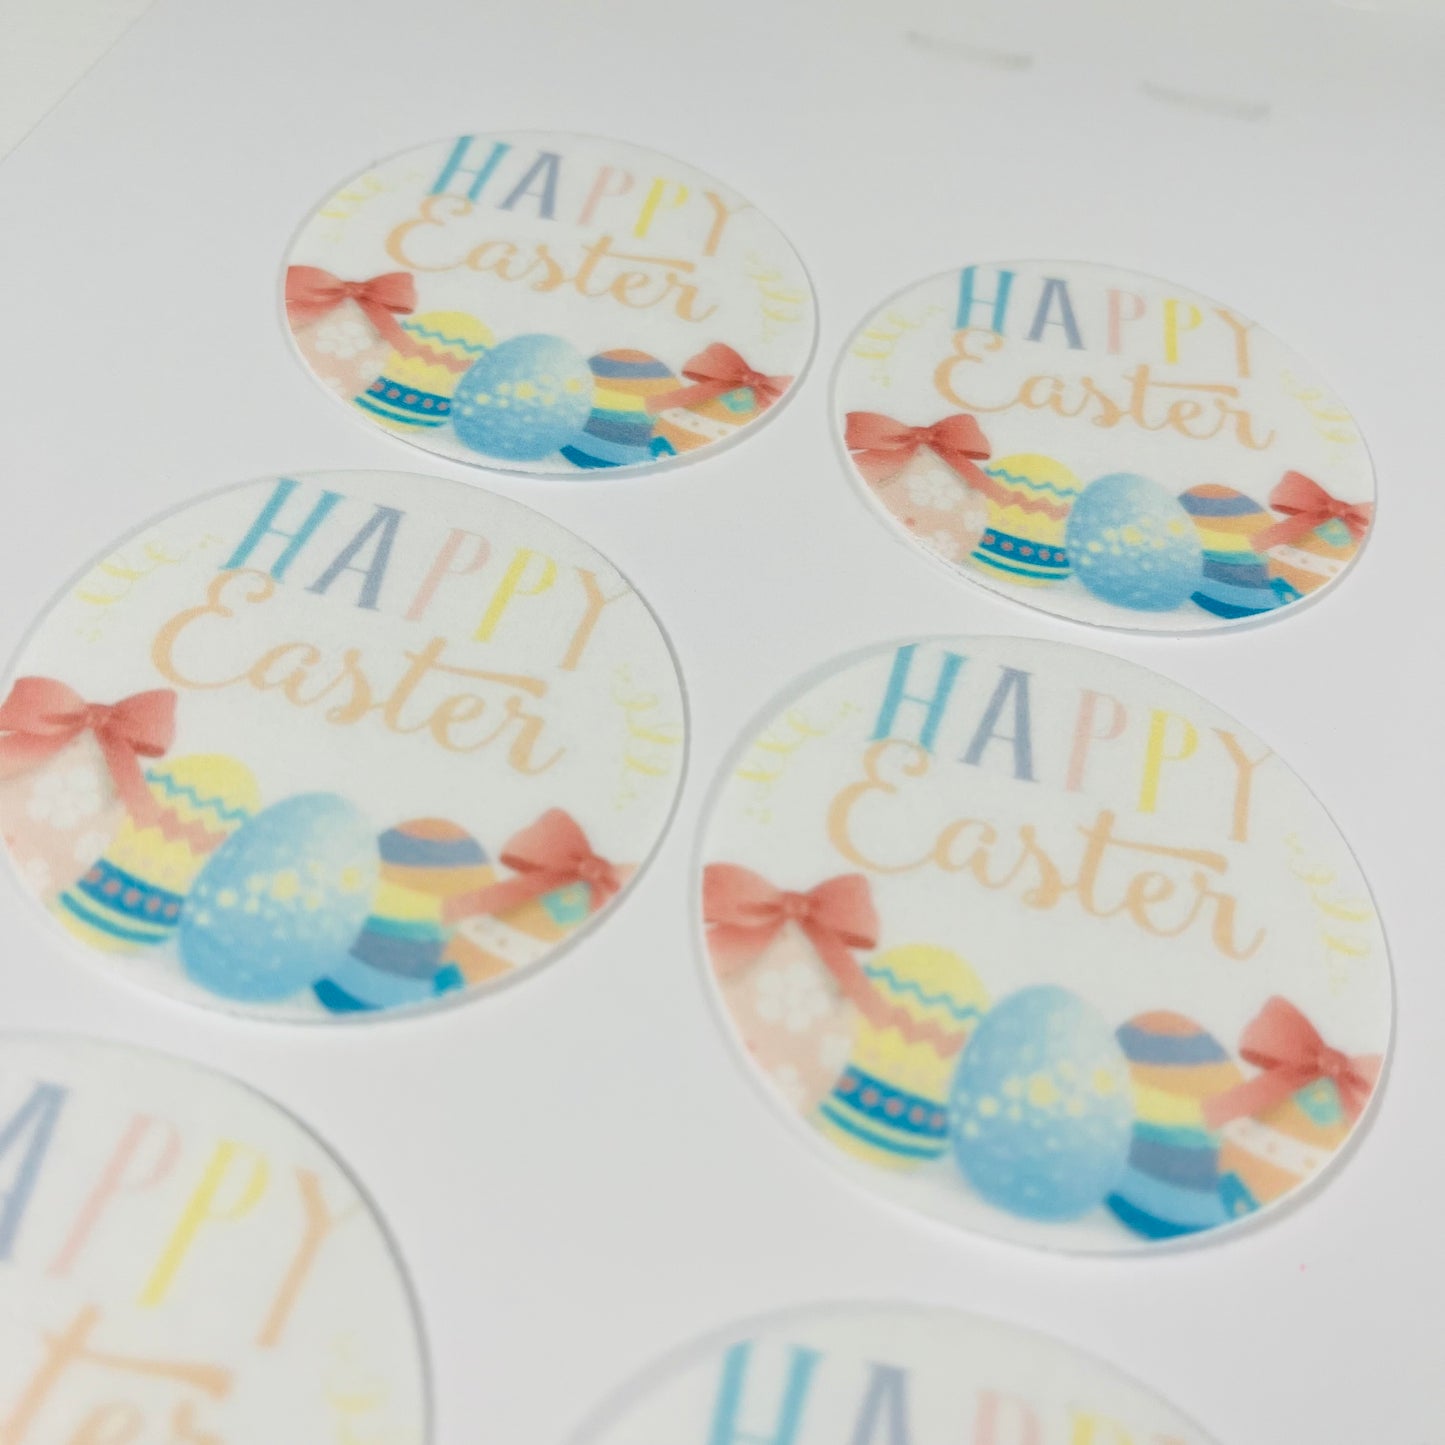 Happy Easter Edible Cupcake Toppers